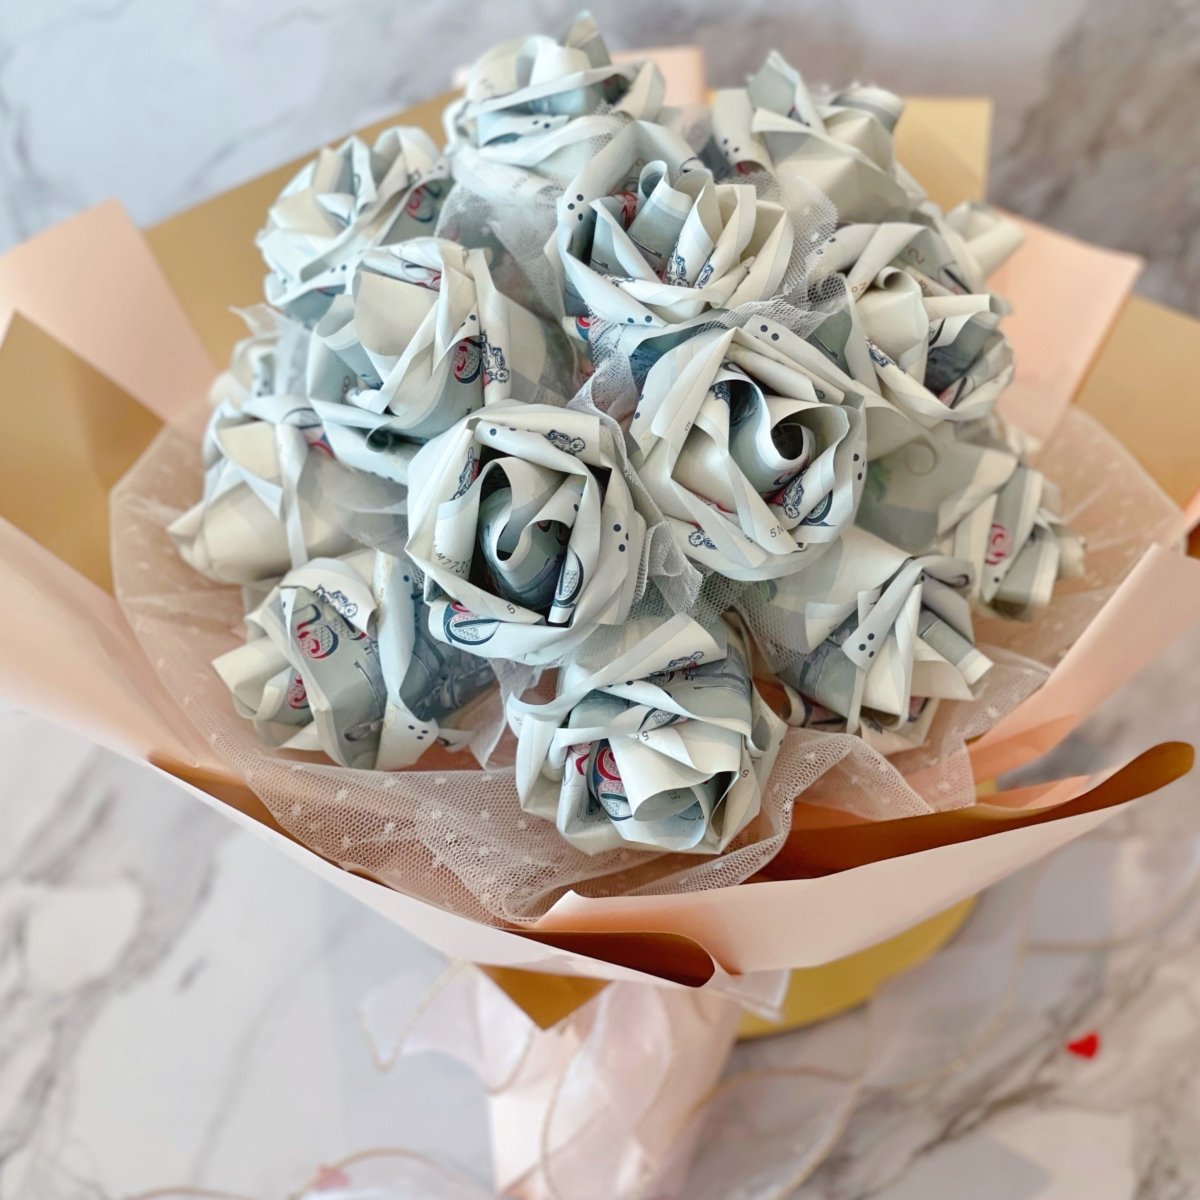 Rose Money Flower Bouquet Gift for Her ( Single Stalk)| Origami Rose made from Real Cash & Banknotes not inclusive (3 days advance order) - Rainbowly Fresh Fruit Gift and Flower Arrangments